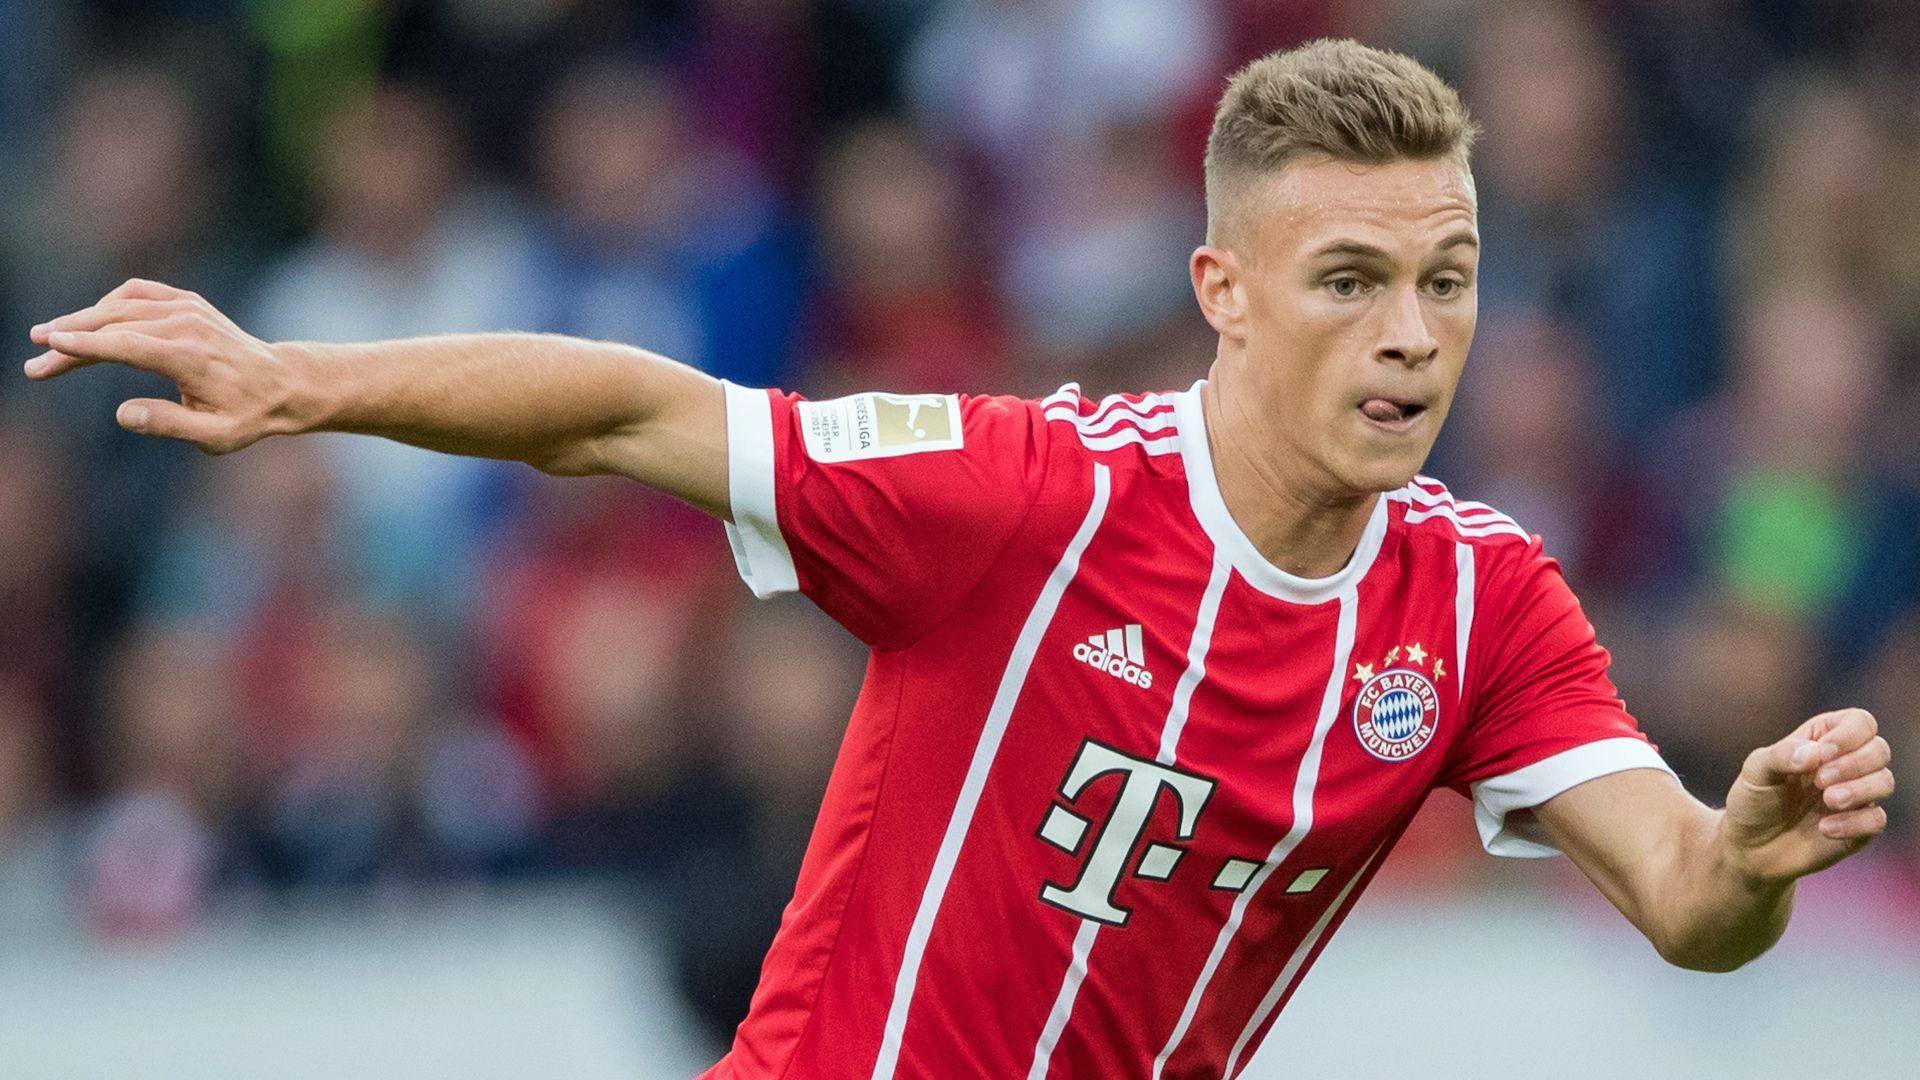 Bayern Munich's Joshua Kimmich: The 22 Year Old Who Can Do It All